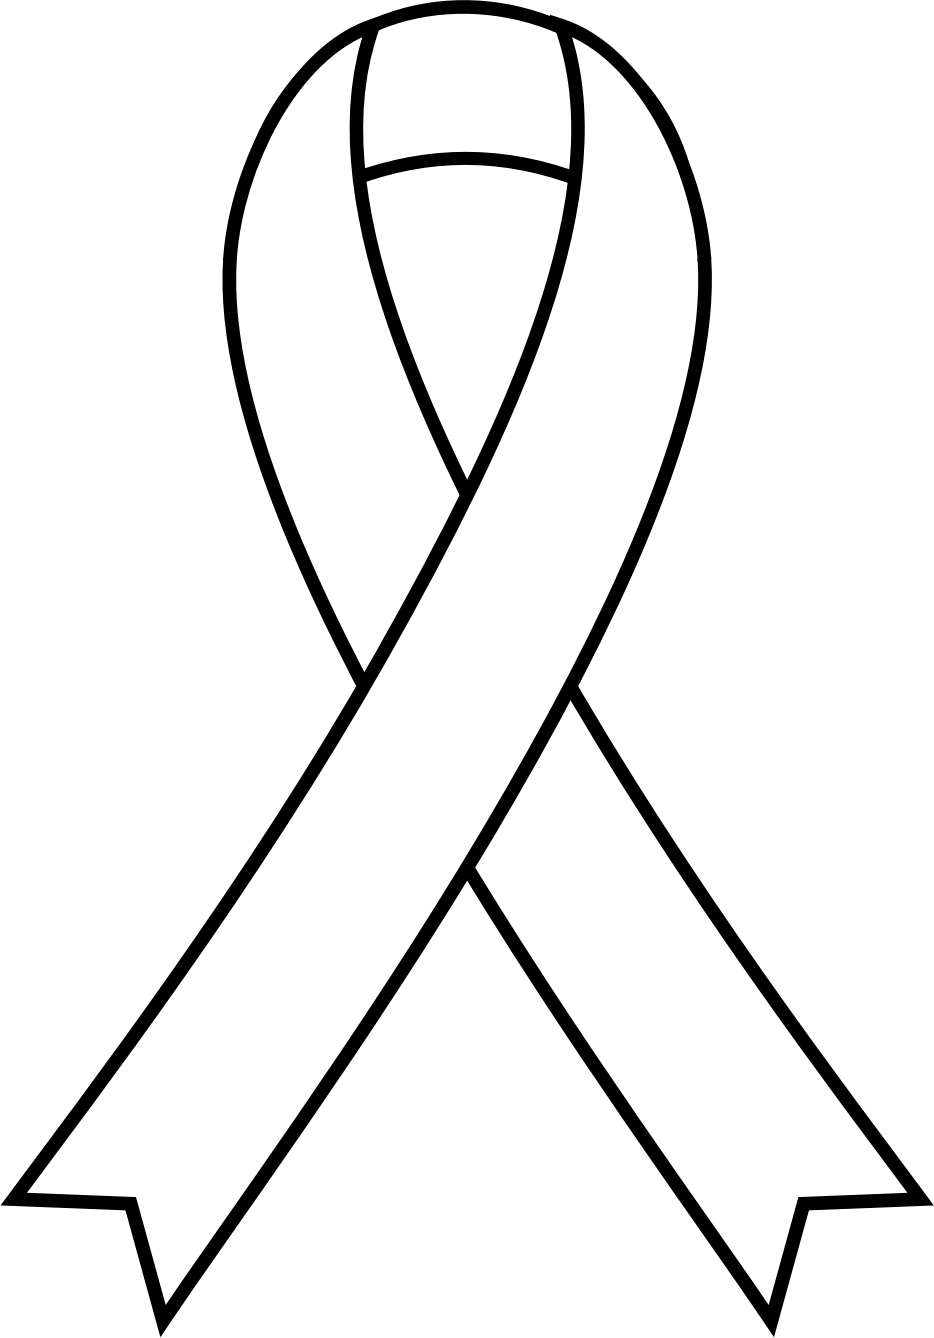 Cancer Awareness Ribbon Clip Art - Support Cancer Ribbon Coloring Pages (934x1338)